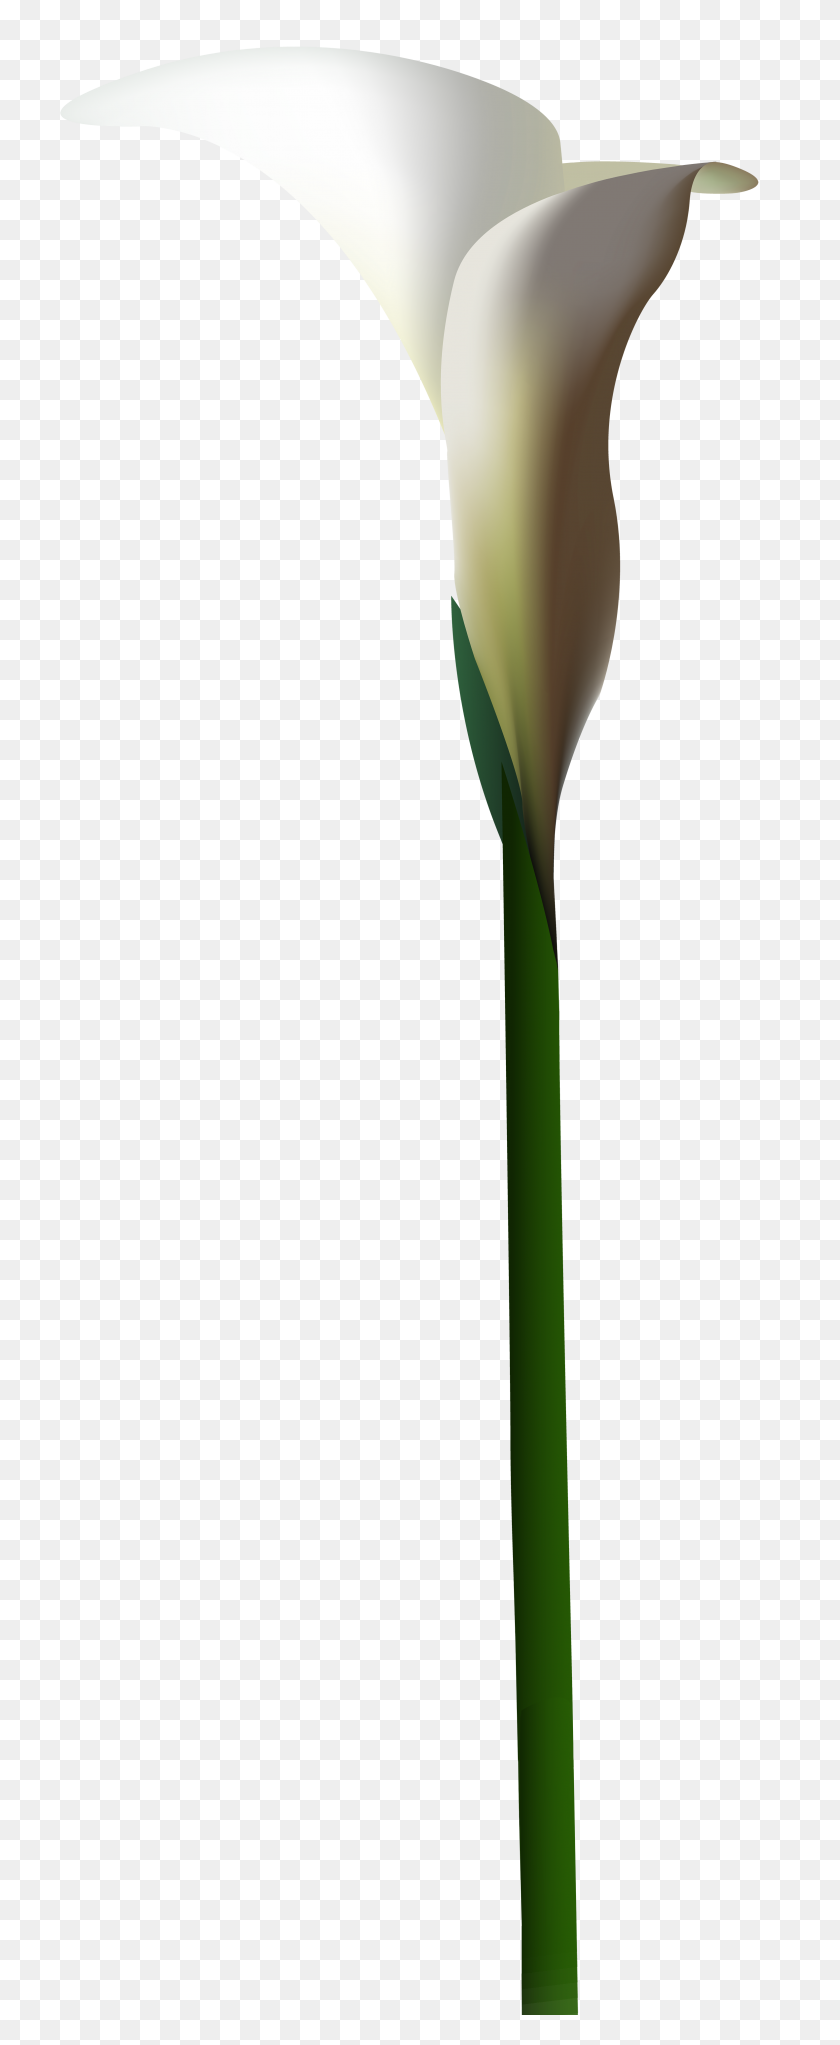 Calla Lily Flower Png Clip Art - Calla Lily PNG – Stunning free ...